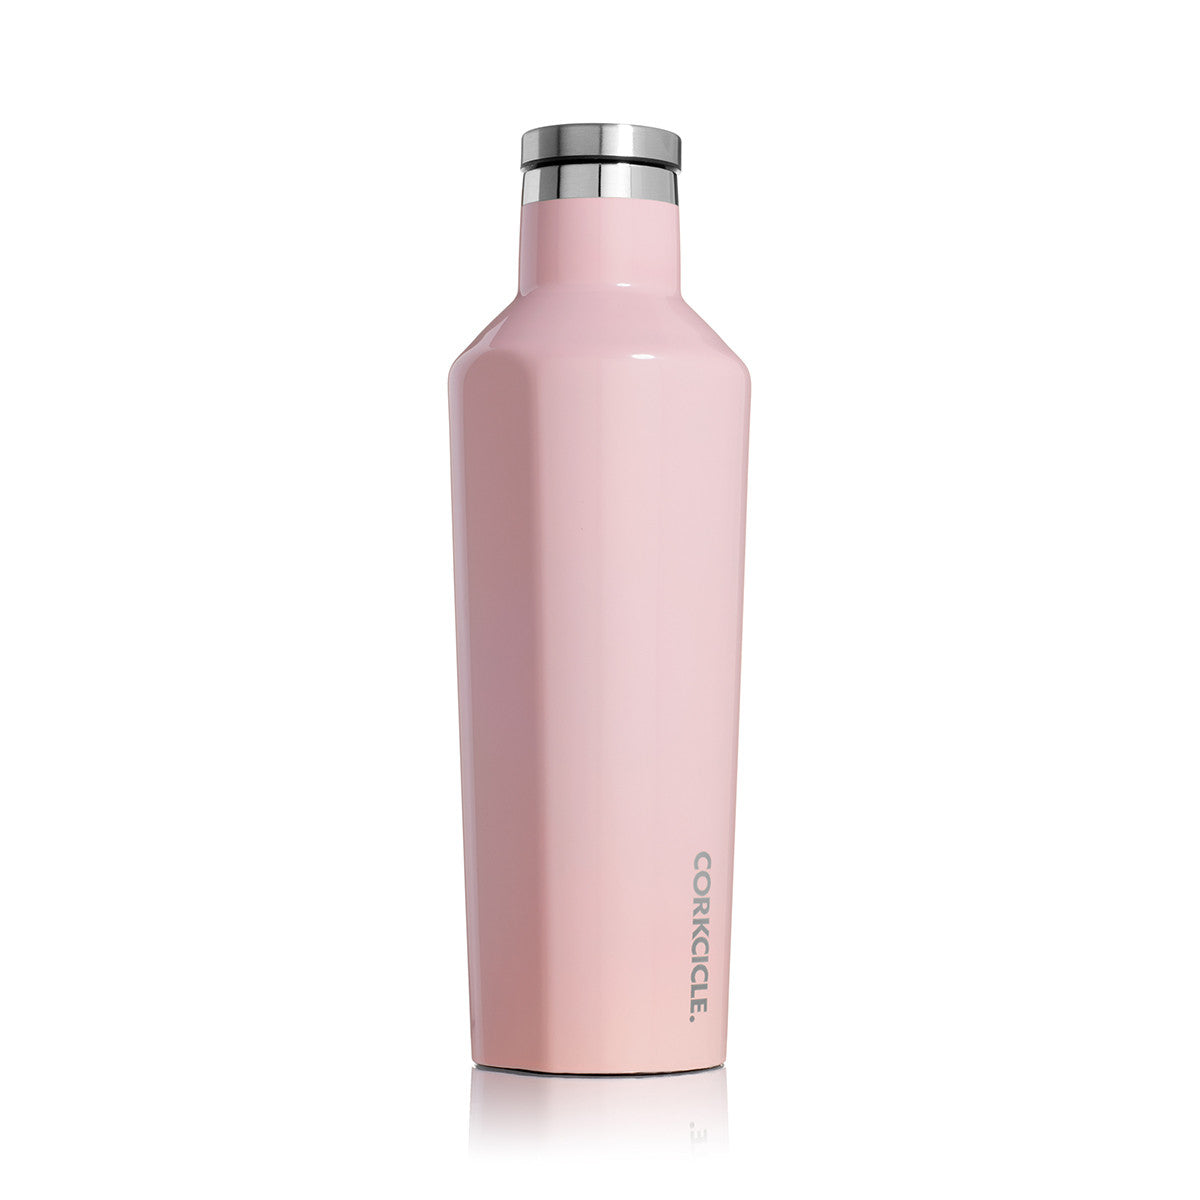 Corkcicle Classic Canteen 475ml - Rose Quartz Insulated Stainless Steel Drink Bottle